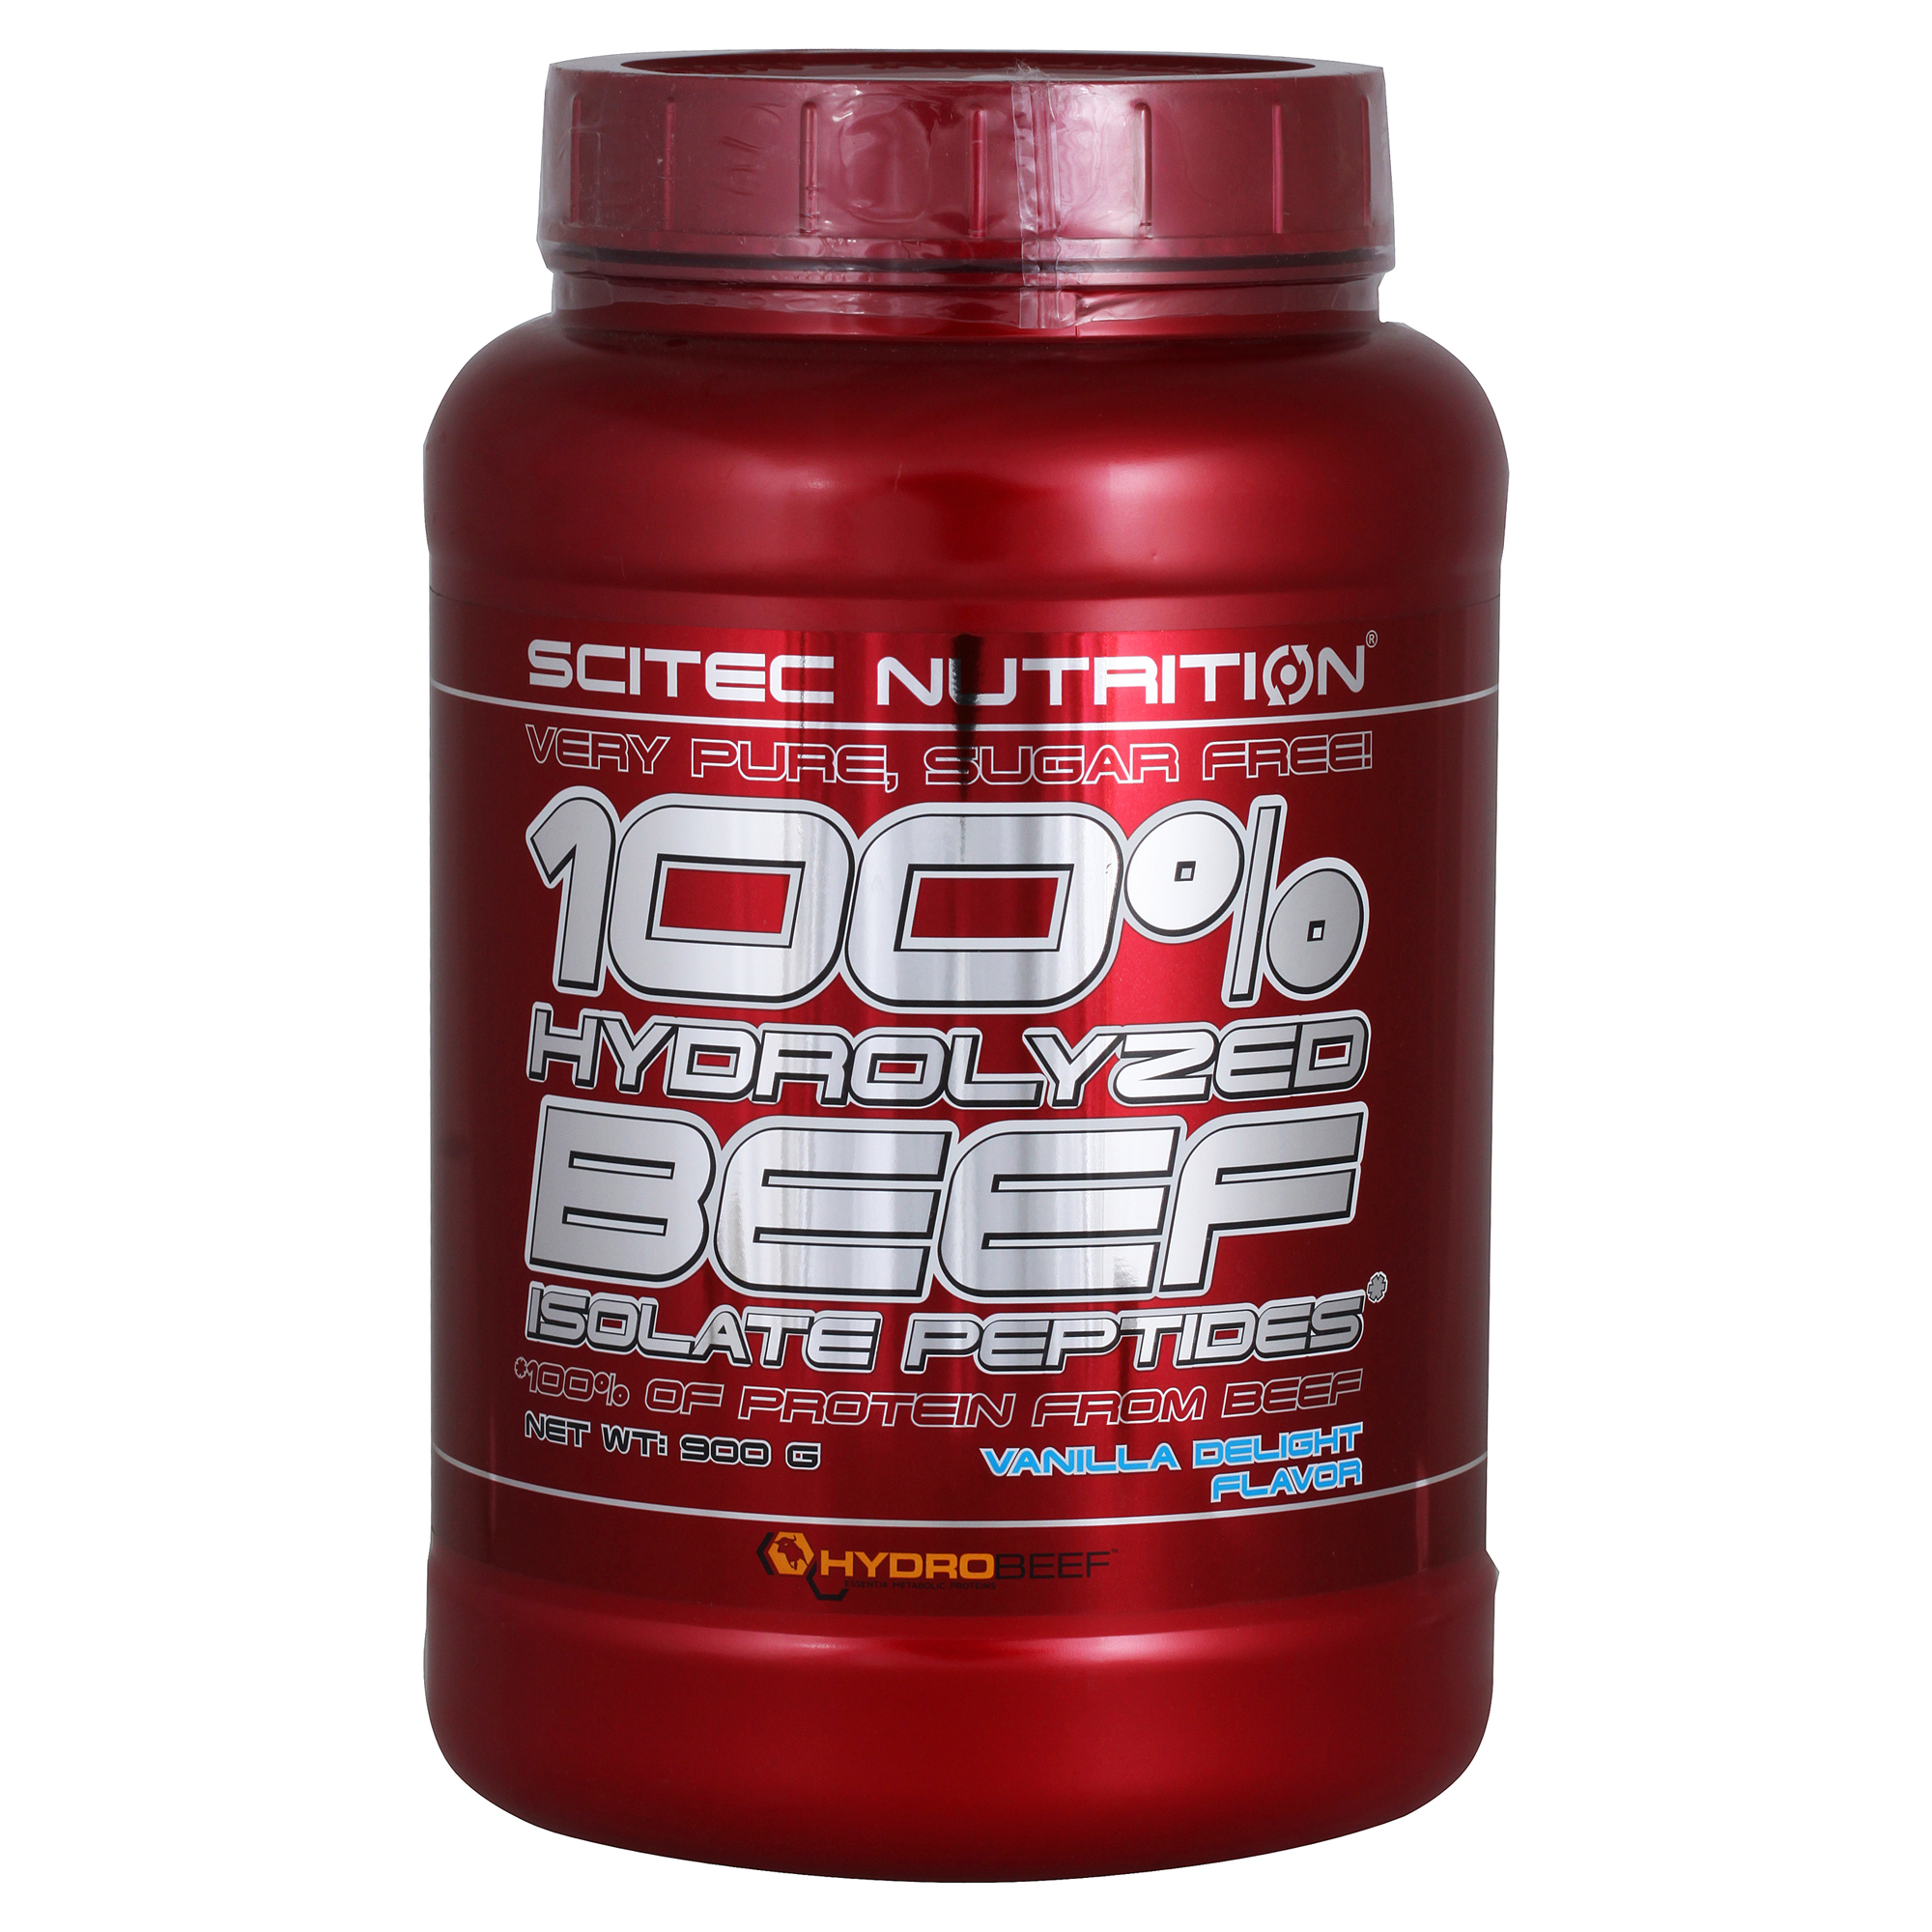 Scitec nutrition 100. Scitec 100% hydrolyzed Beef isolate Peptides 900 г. 100% Hydro Beef Peptid 900 гр. Scitec Nutrition 100% hydrolyzed Beef isolate Peptides. Scitec Nutrition Beef 900g.